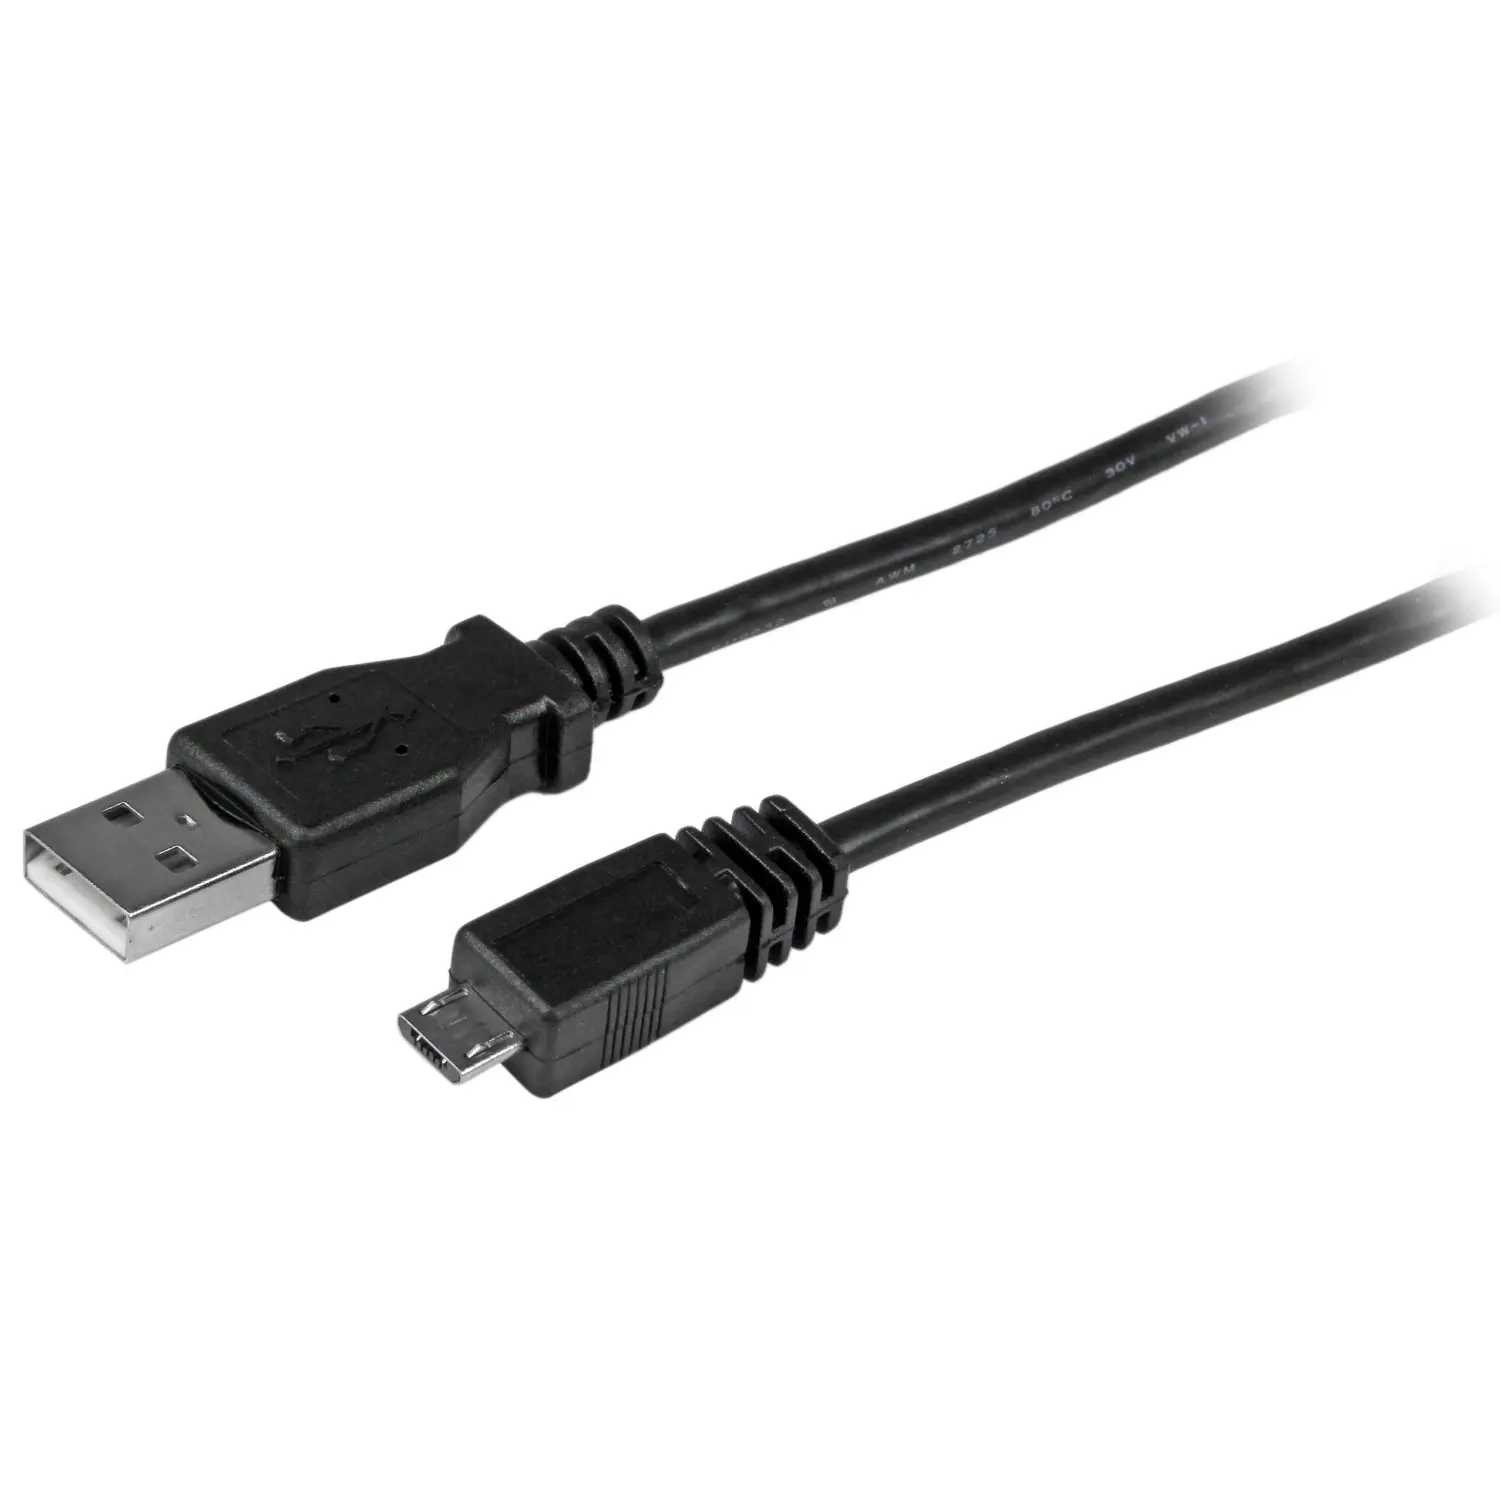 playstation 4 usb charging cable